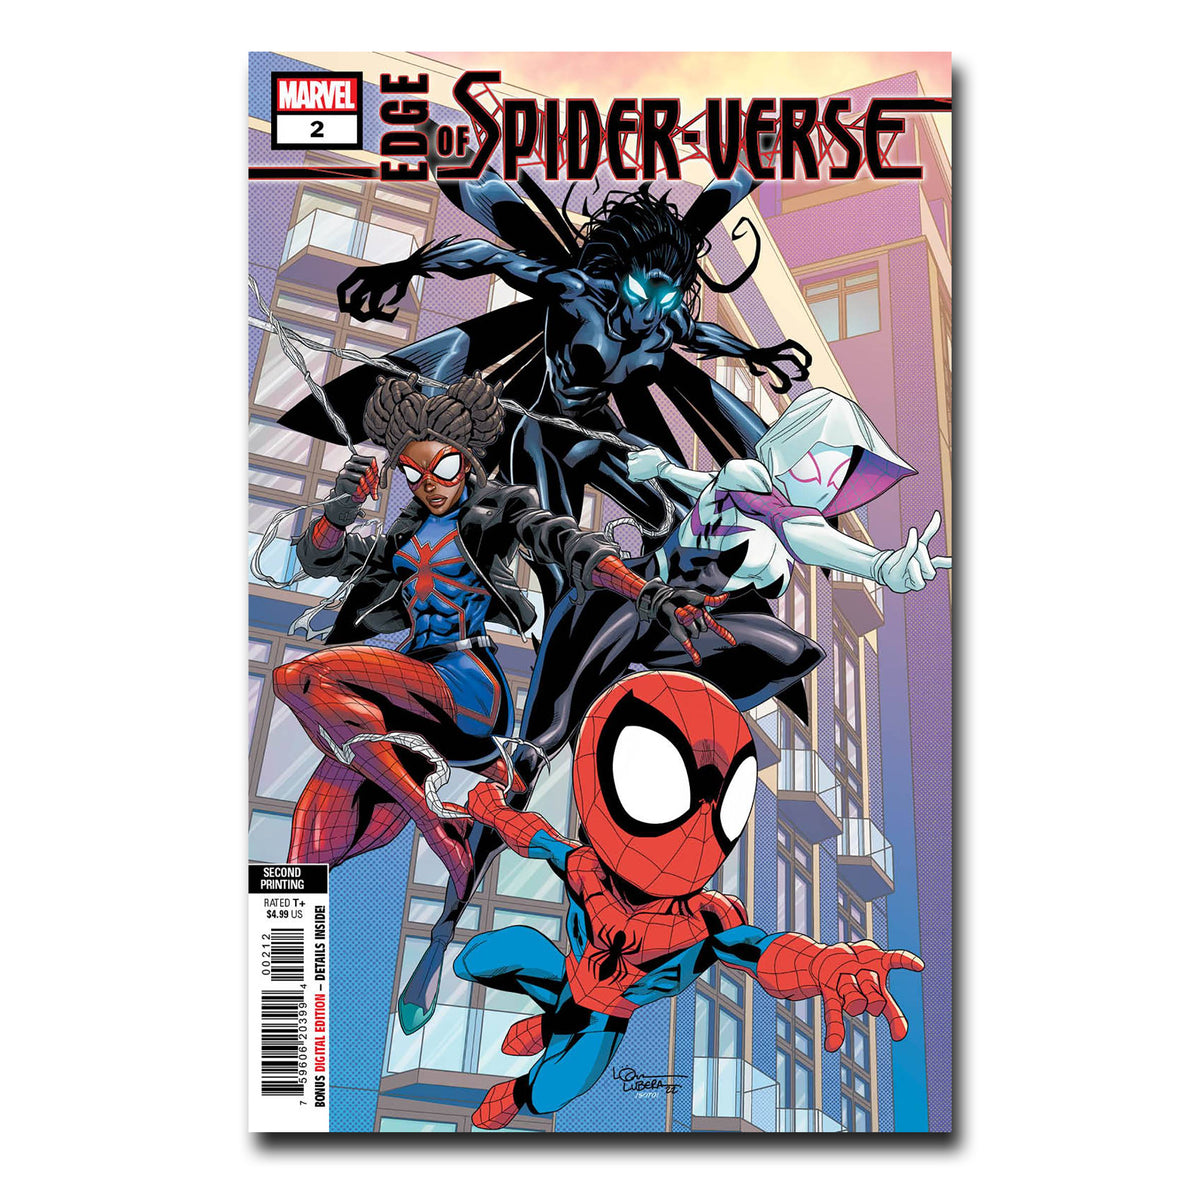 Edge of Spider-Verse #2 (of 5) 2ND Print Cover Variant LUBERA FINALSALE